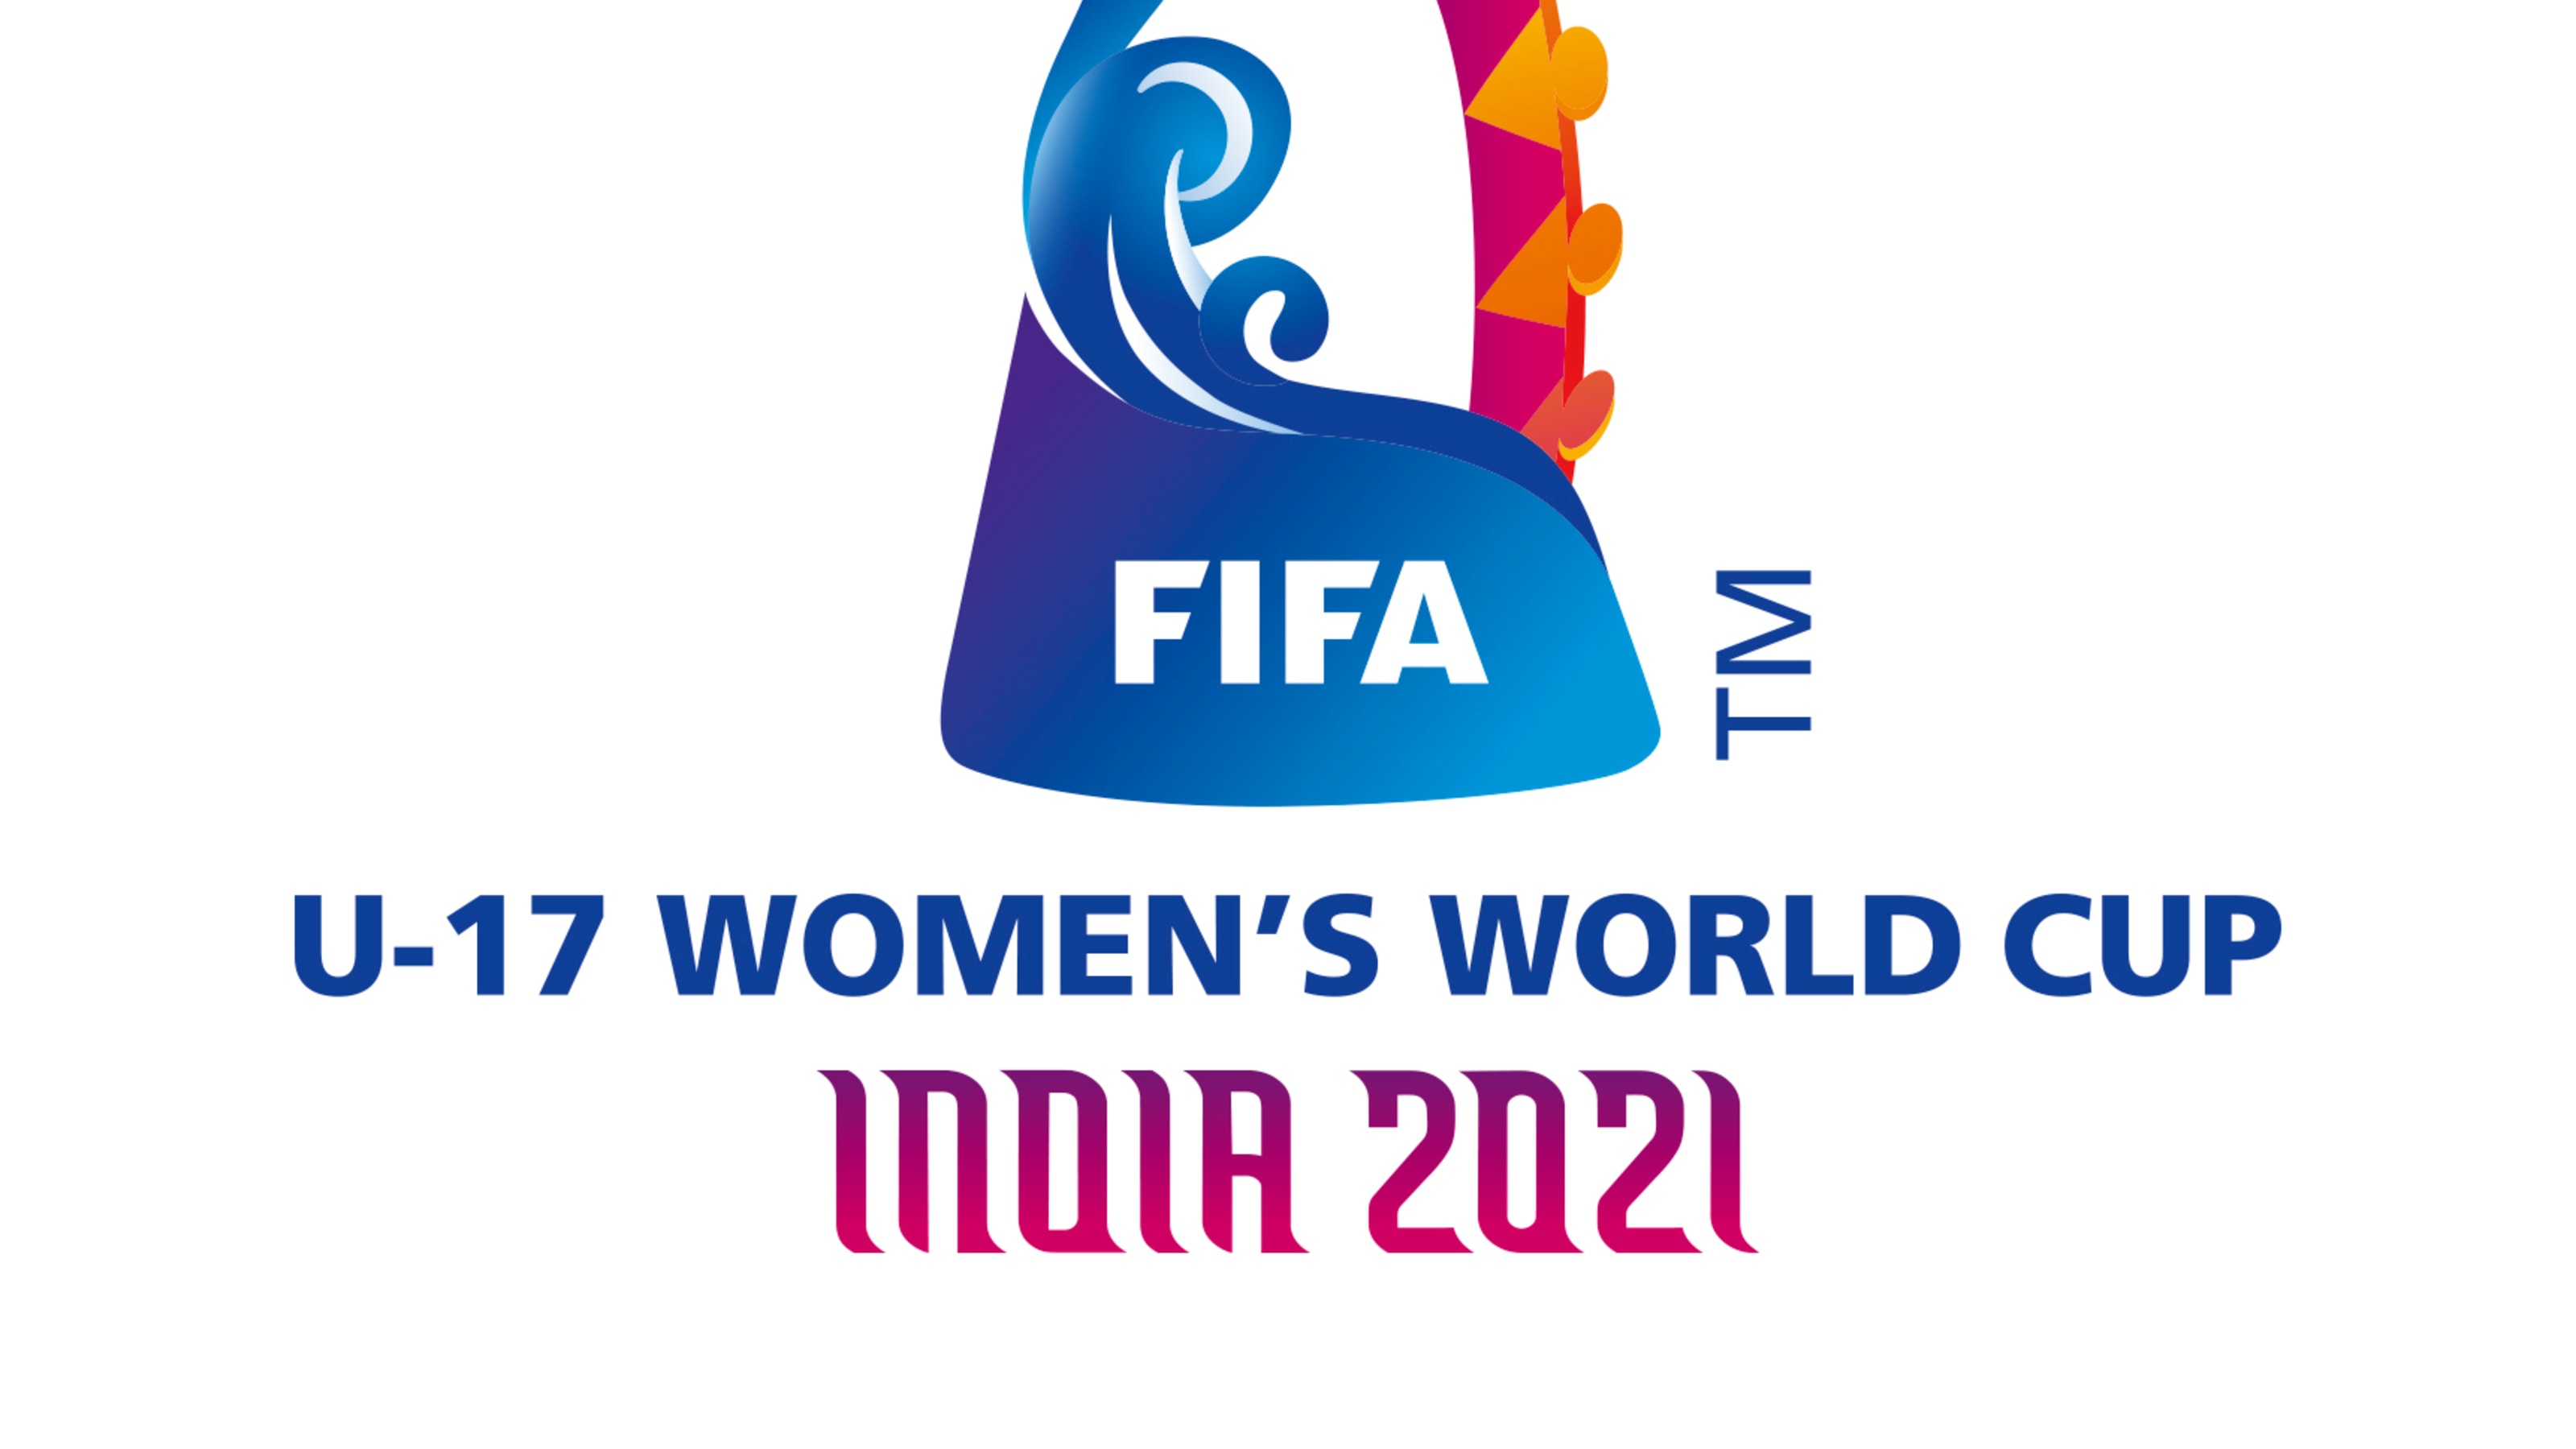 England Spain And Germany Qualify For U 17 Women S Fifa World Cup In India